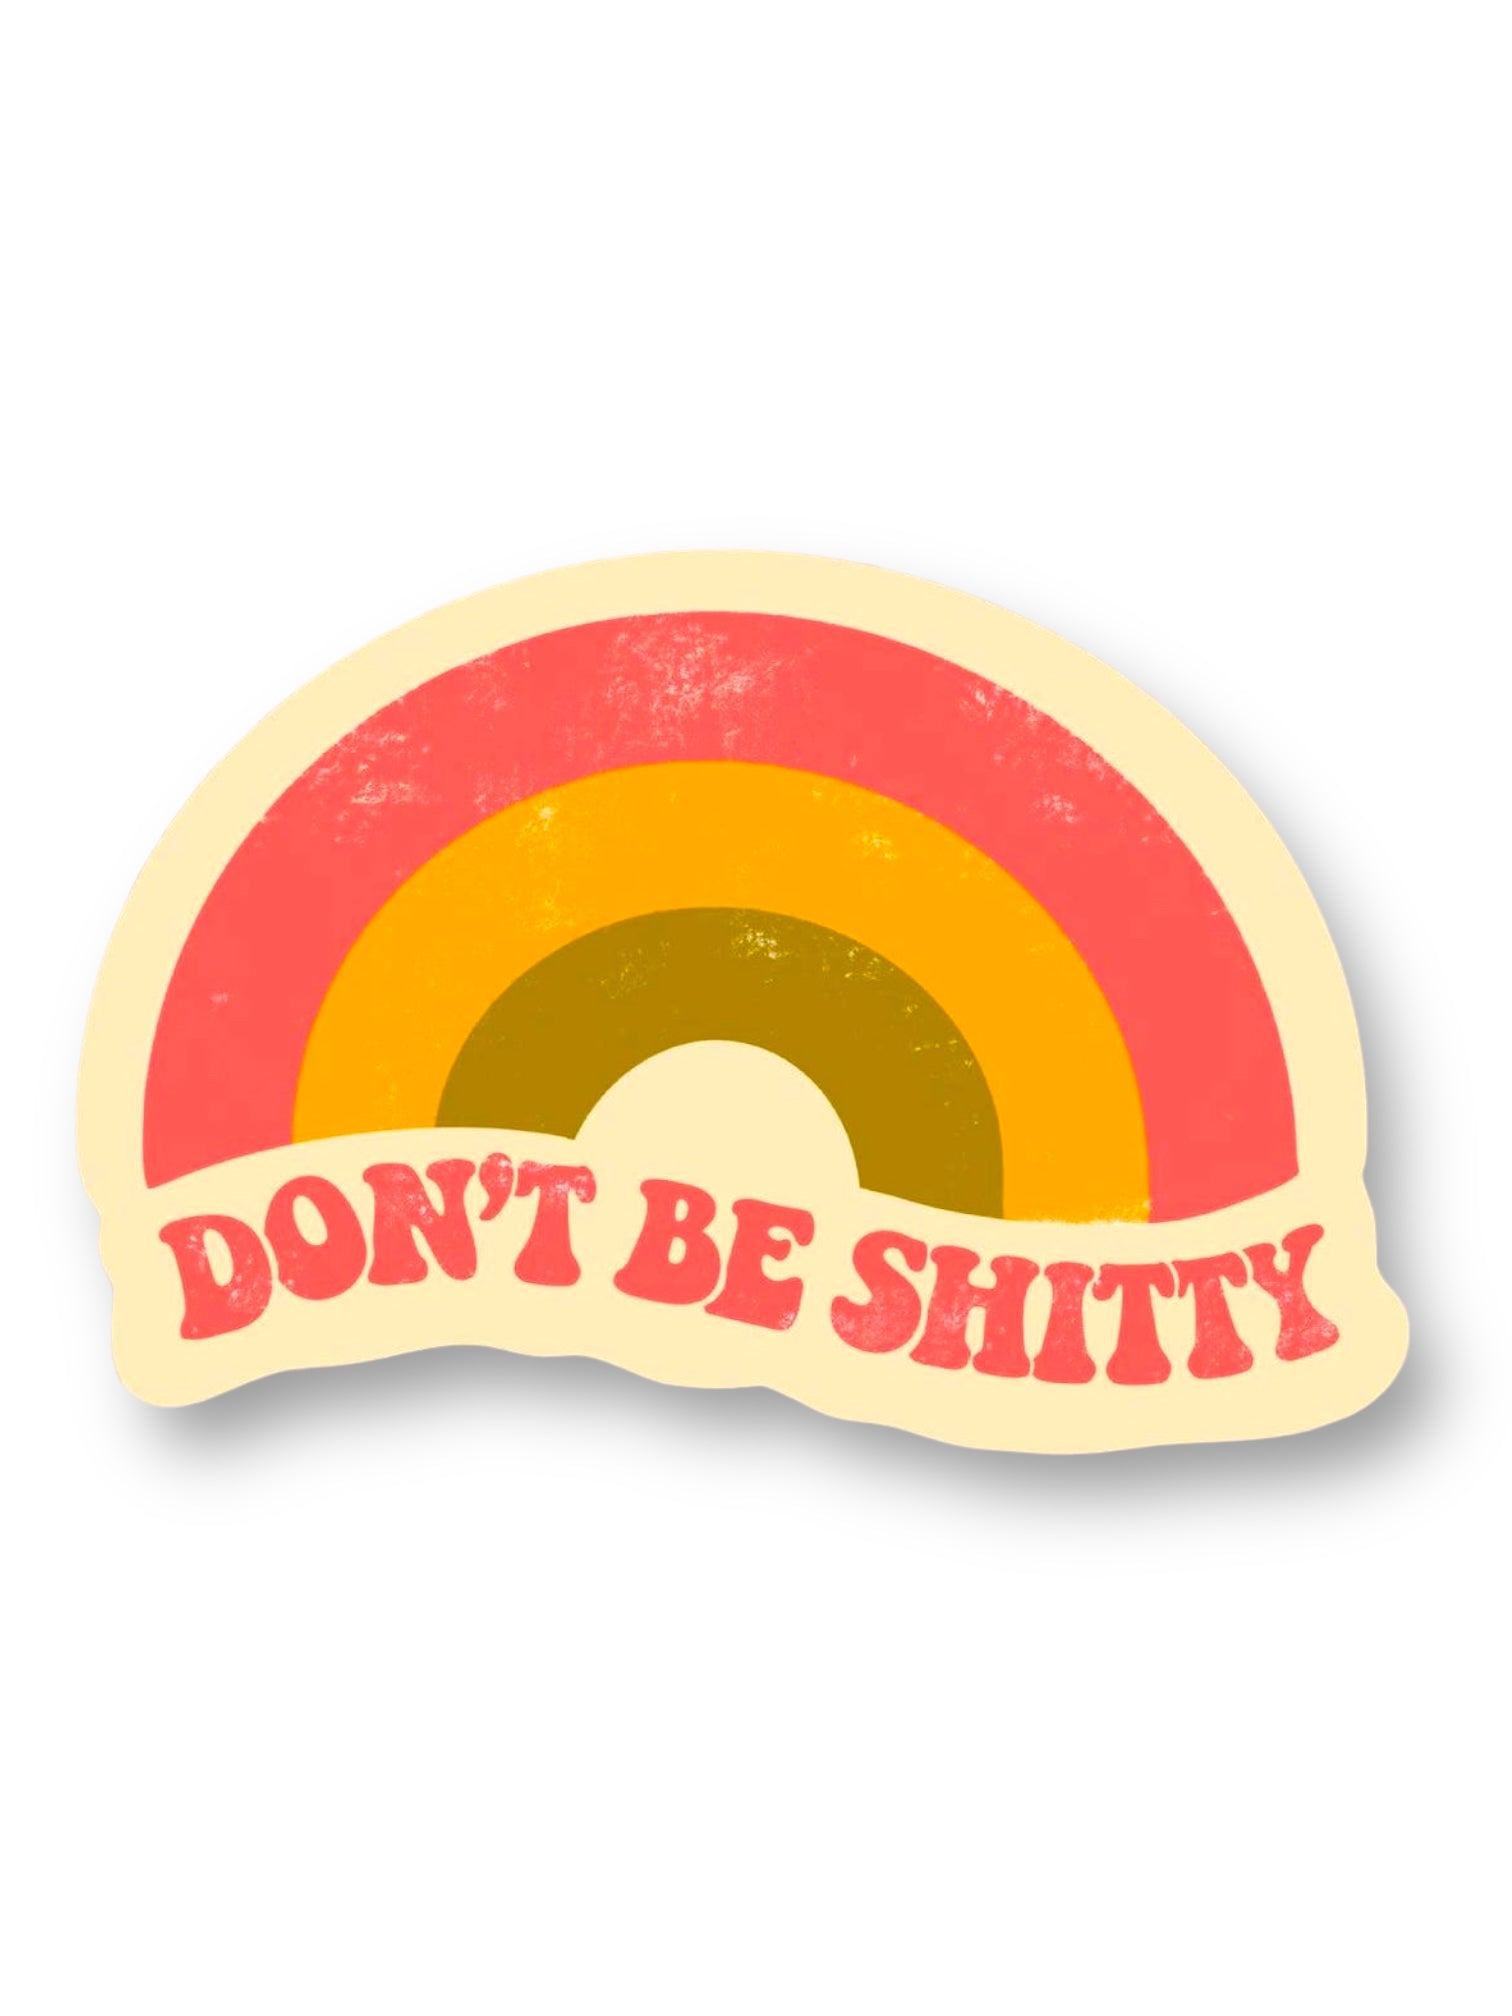 Don't Be Shitty Rainbow Sticker by Big Moods, Sold by Le Monkey House